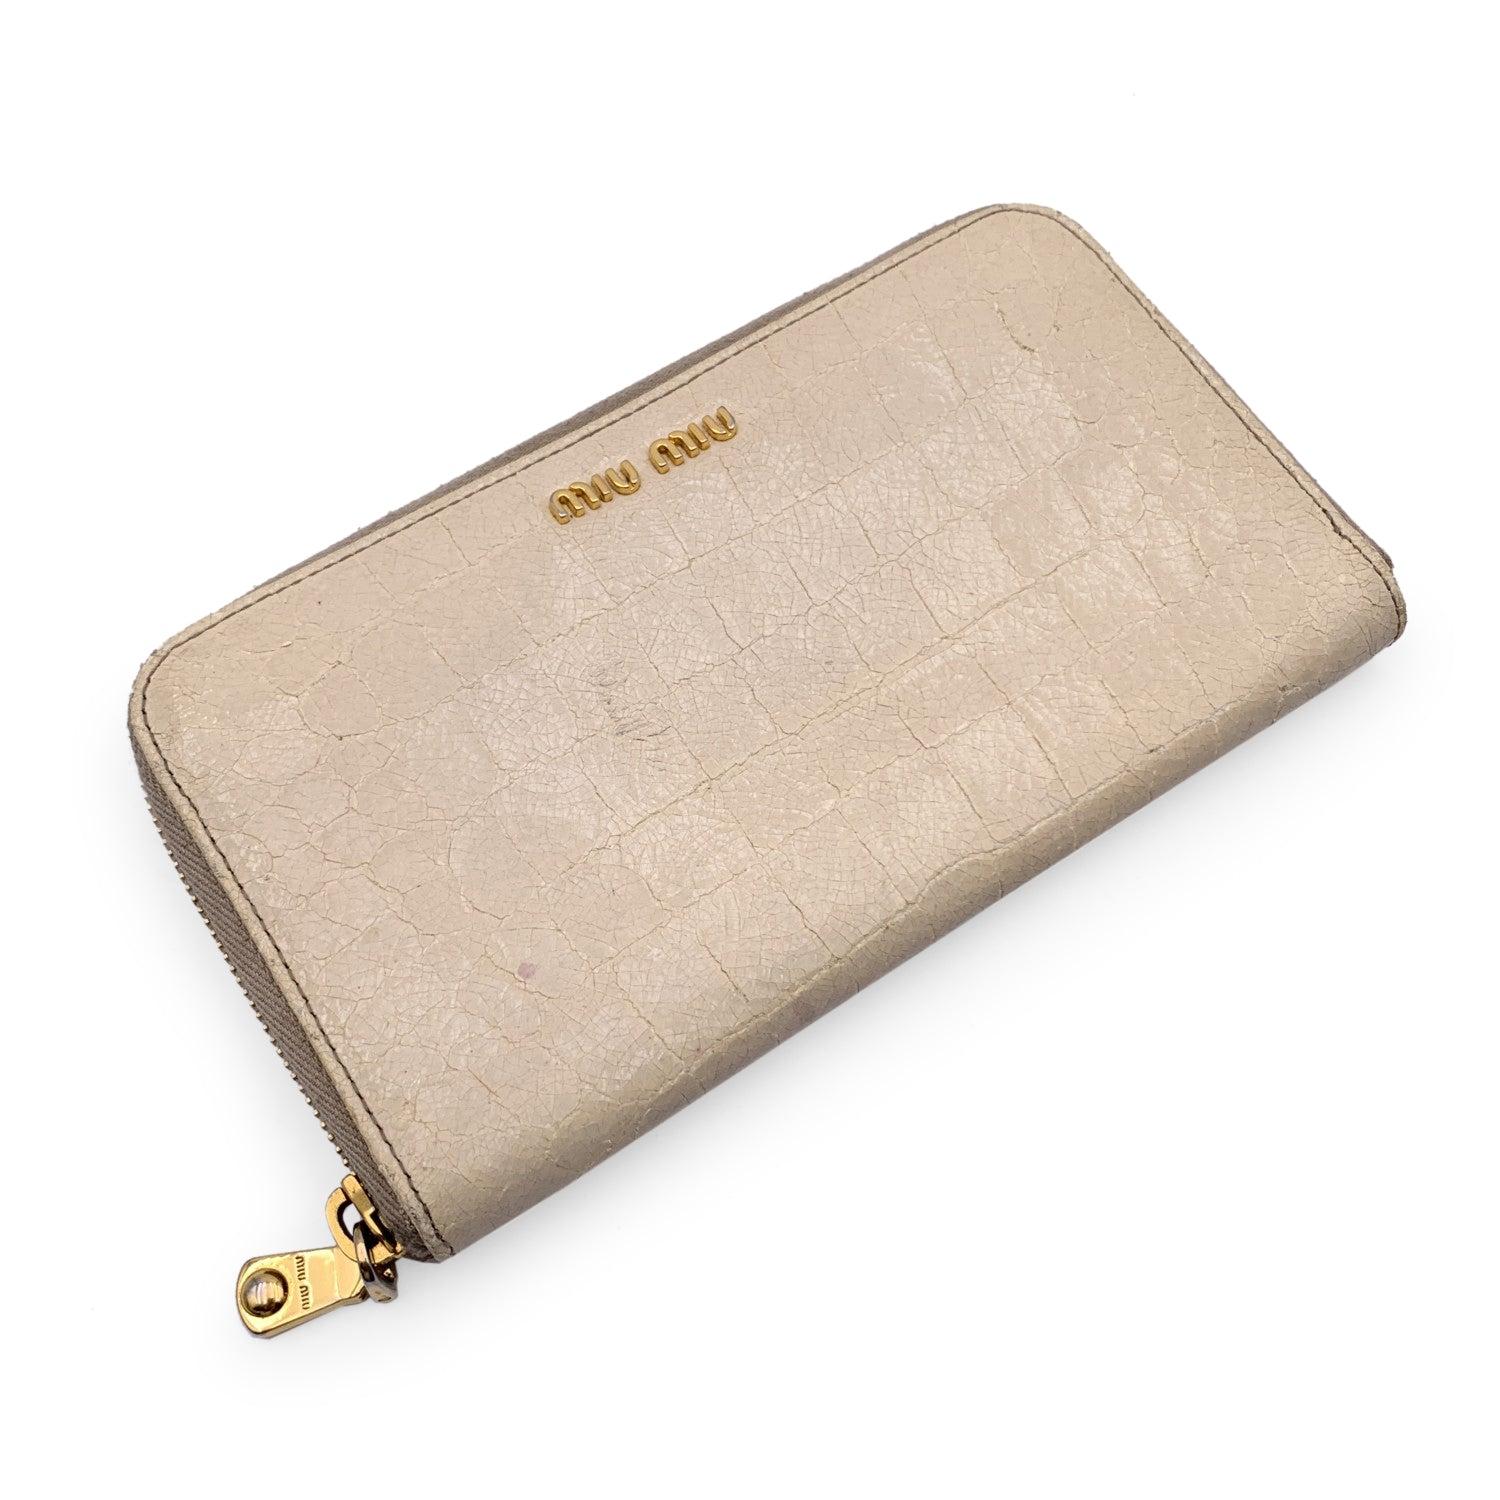 Miu Miu Zippy Wallet crafted in light beige embossed leather. Zip closure. It features 2 main compartments for bill, 2 flat open pockets, 1 zip coin compartment, 8 credit card slots. Gold metal MIU MIU lettering on the front. 'Miu Miu' and 'Made in